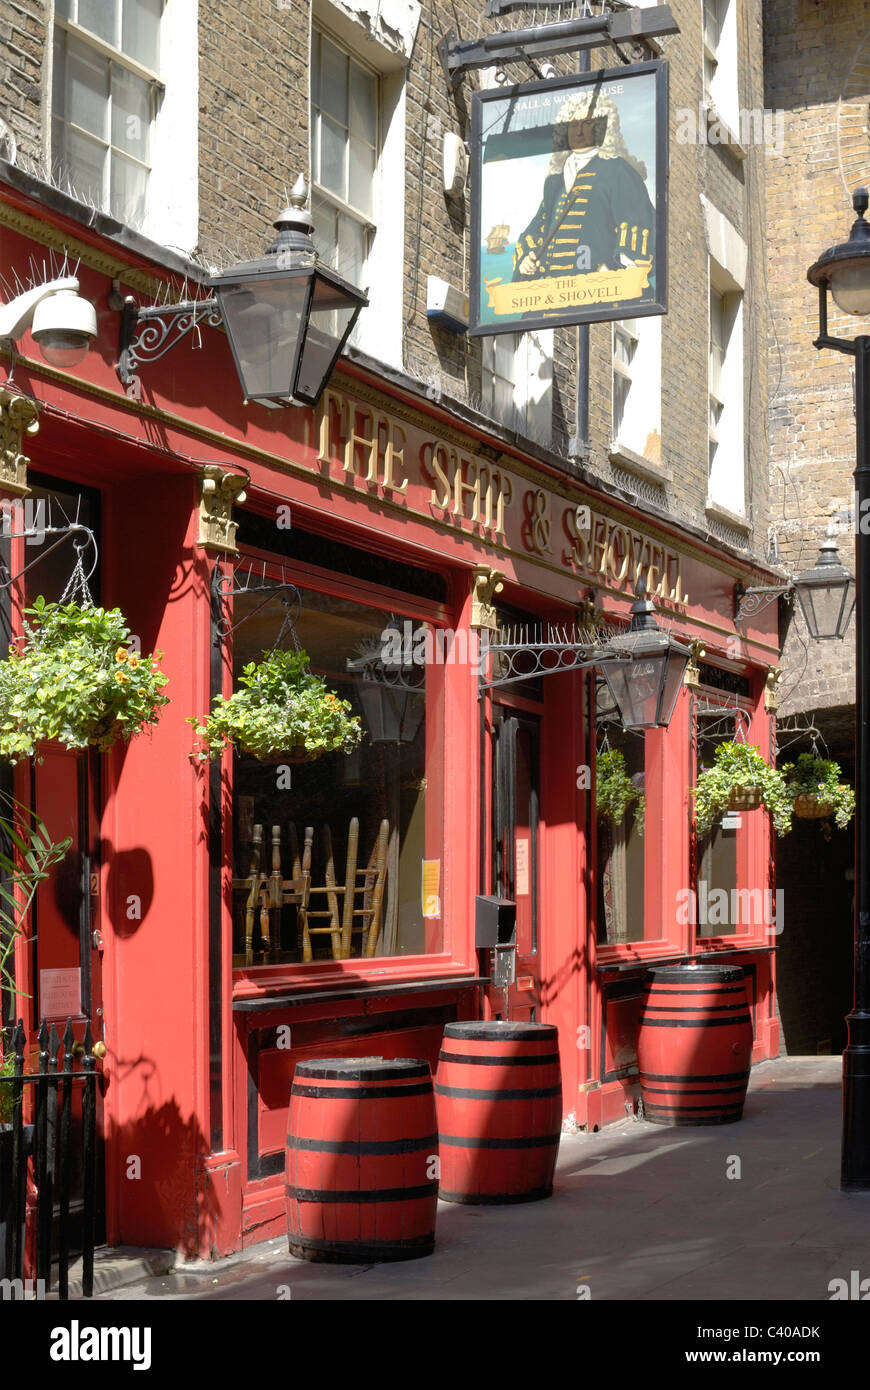 England. London. Westminster. The Ship and Shovel Public House. Near to Charing Cross railway station. Stock Photo